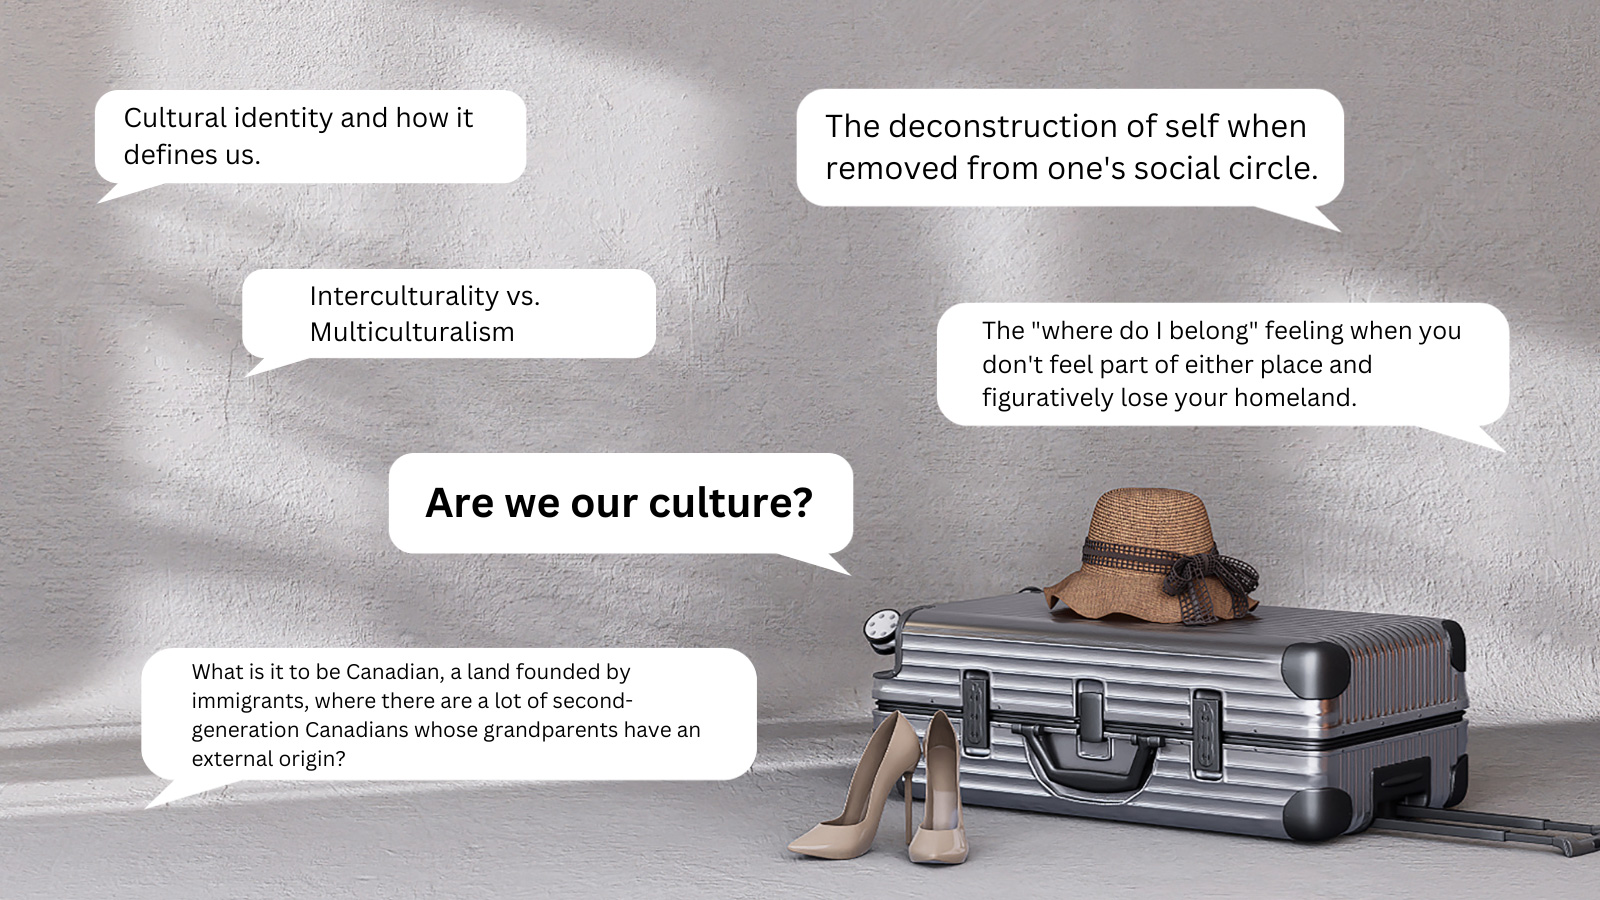 A series of speech bubbles relaying conflicting thoughts about culture and the self, including "Are we our culture?" and "Where do I belong?"